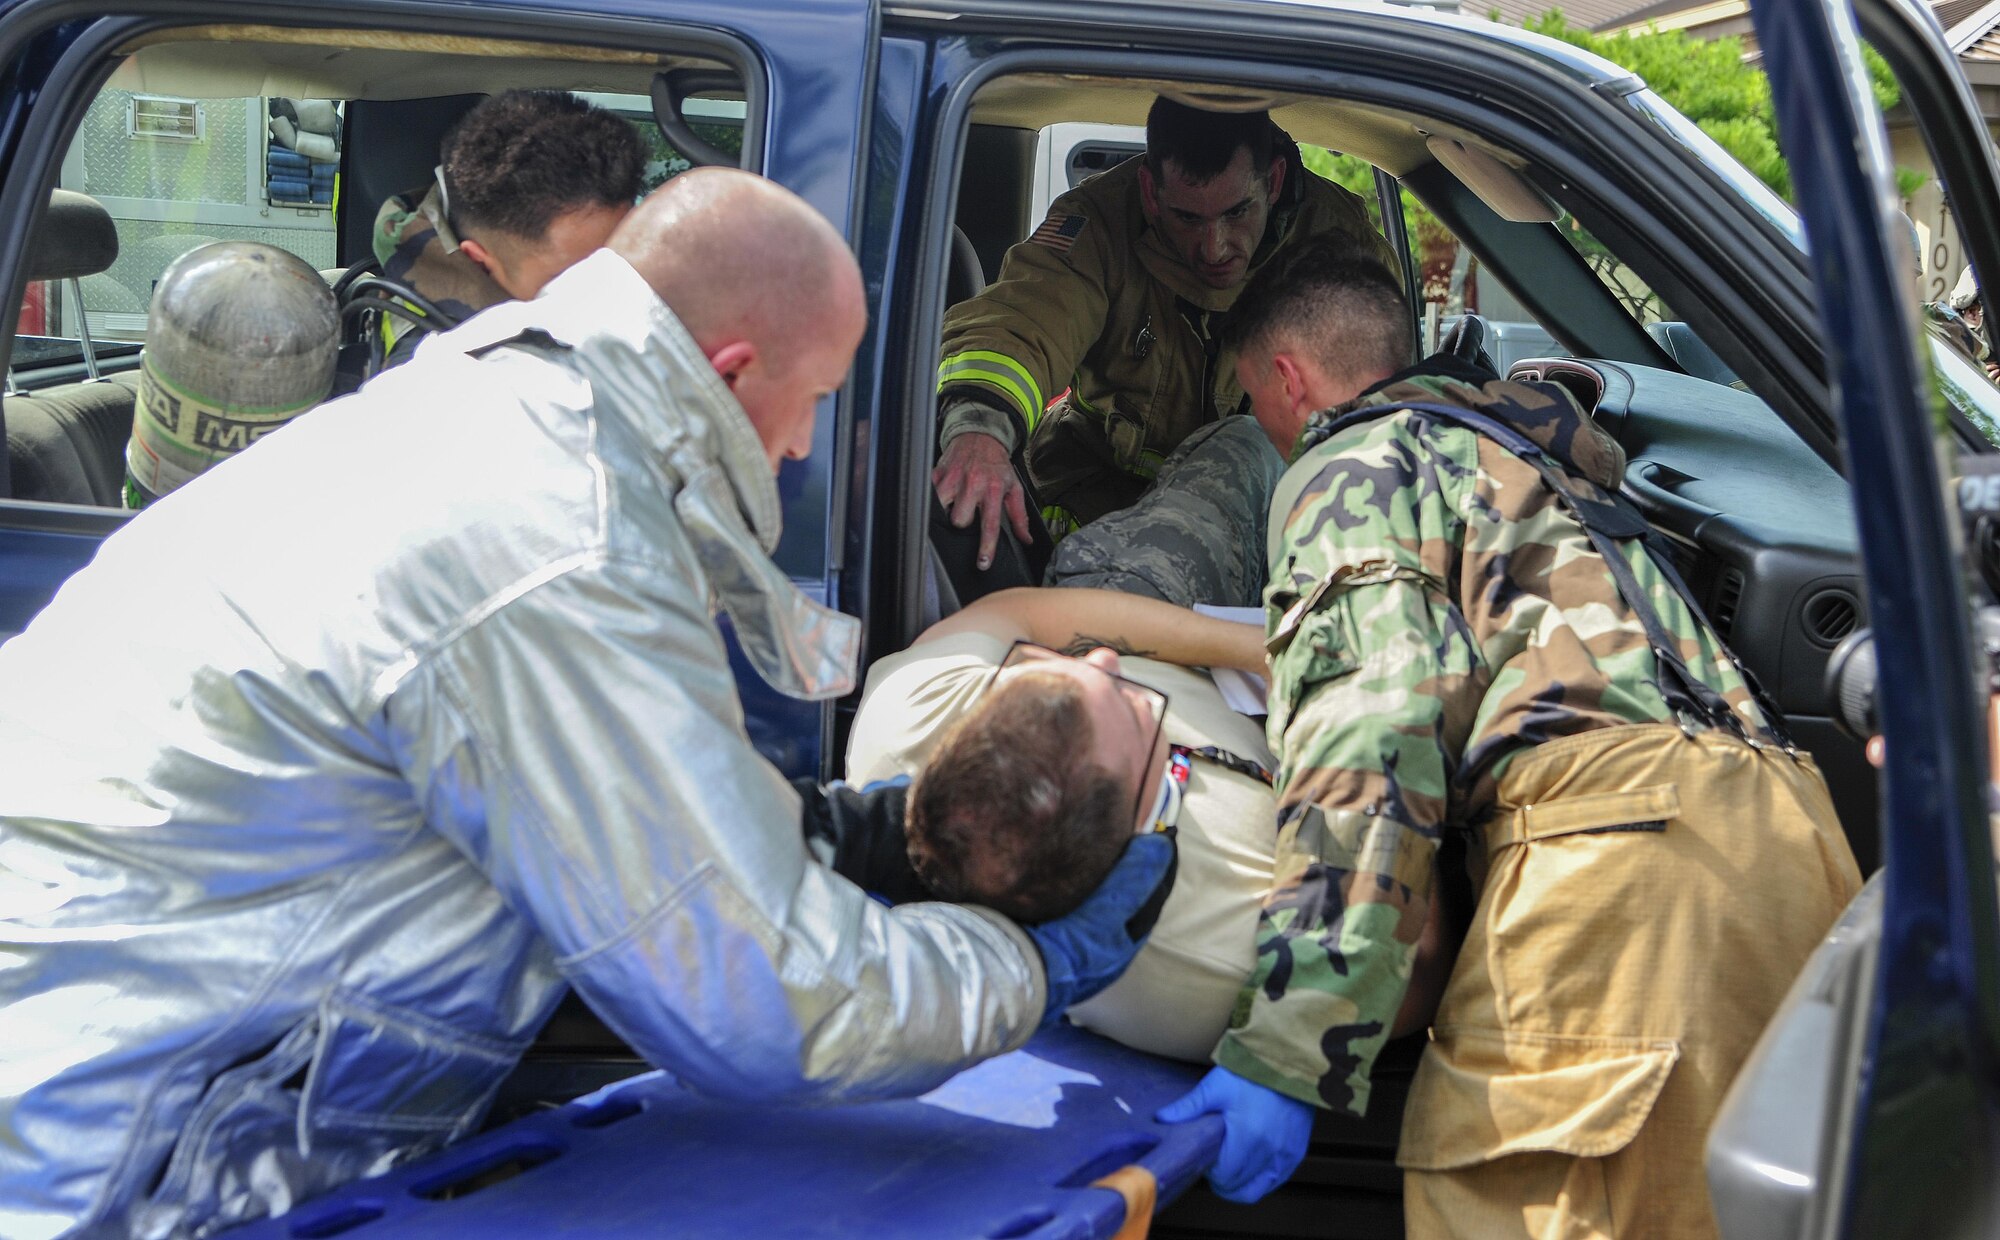 U.S. Air Force Airmen assigned to the 8th Civil Engineer Squadron fire department, remove a victim from a simulated car accident from the passenger seat onto a long spine backboard for transportation during training exercise Beverly Pack 17-3, at Kunsan Air Base, Republic of Korea, Aug. 22, 2017. This training test the medical and firefighting Airmen on responding to an accident and treating patients in high stress environments. (U.S. Air Force photo by Senior Airman Colby L. Hardin/Released)